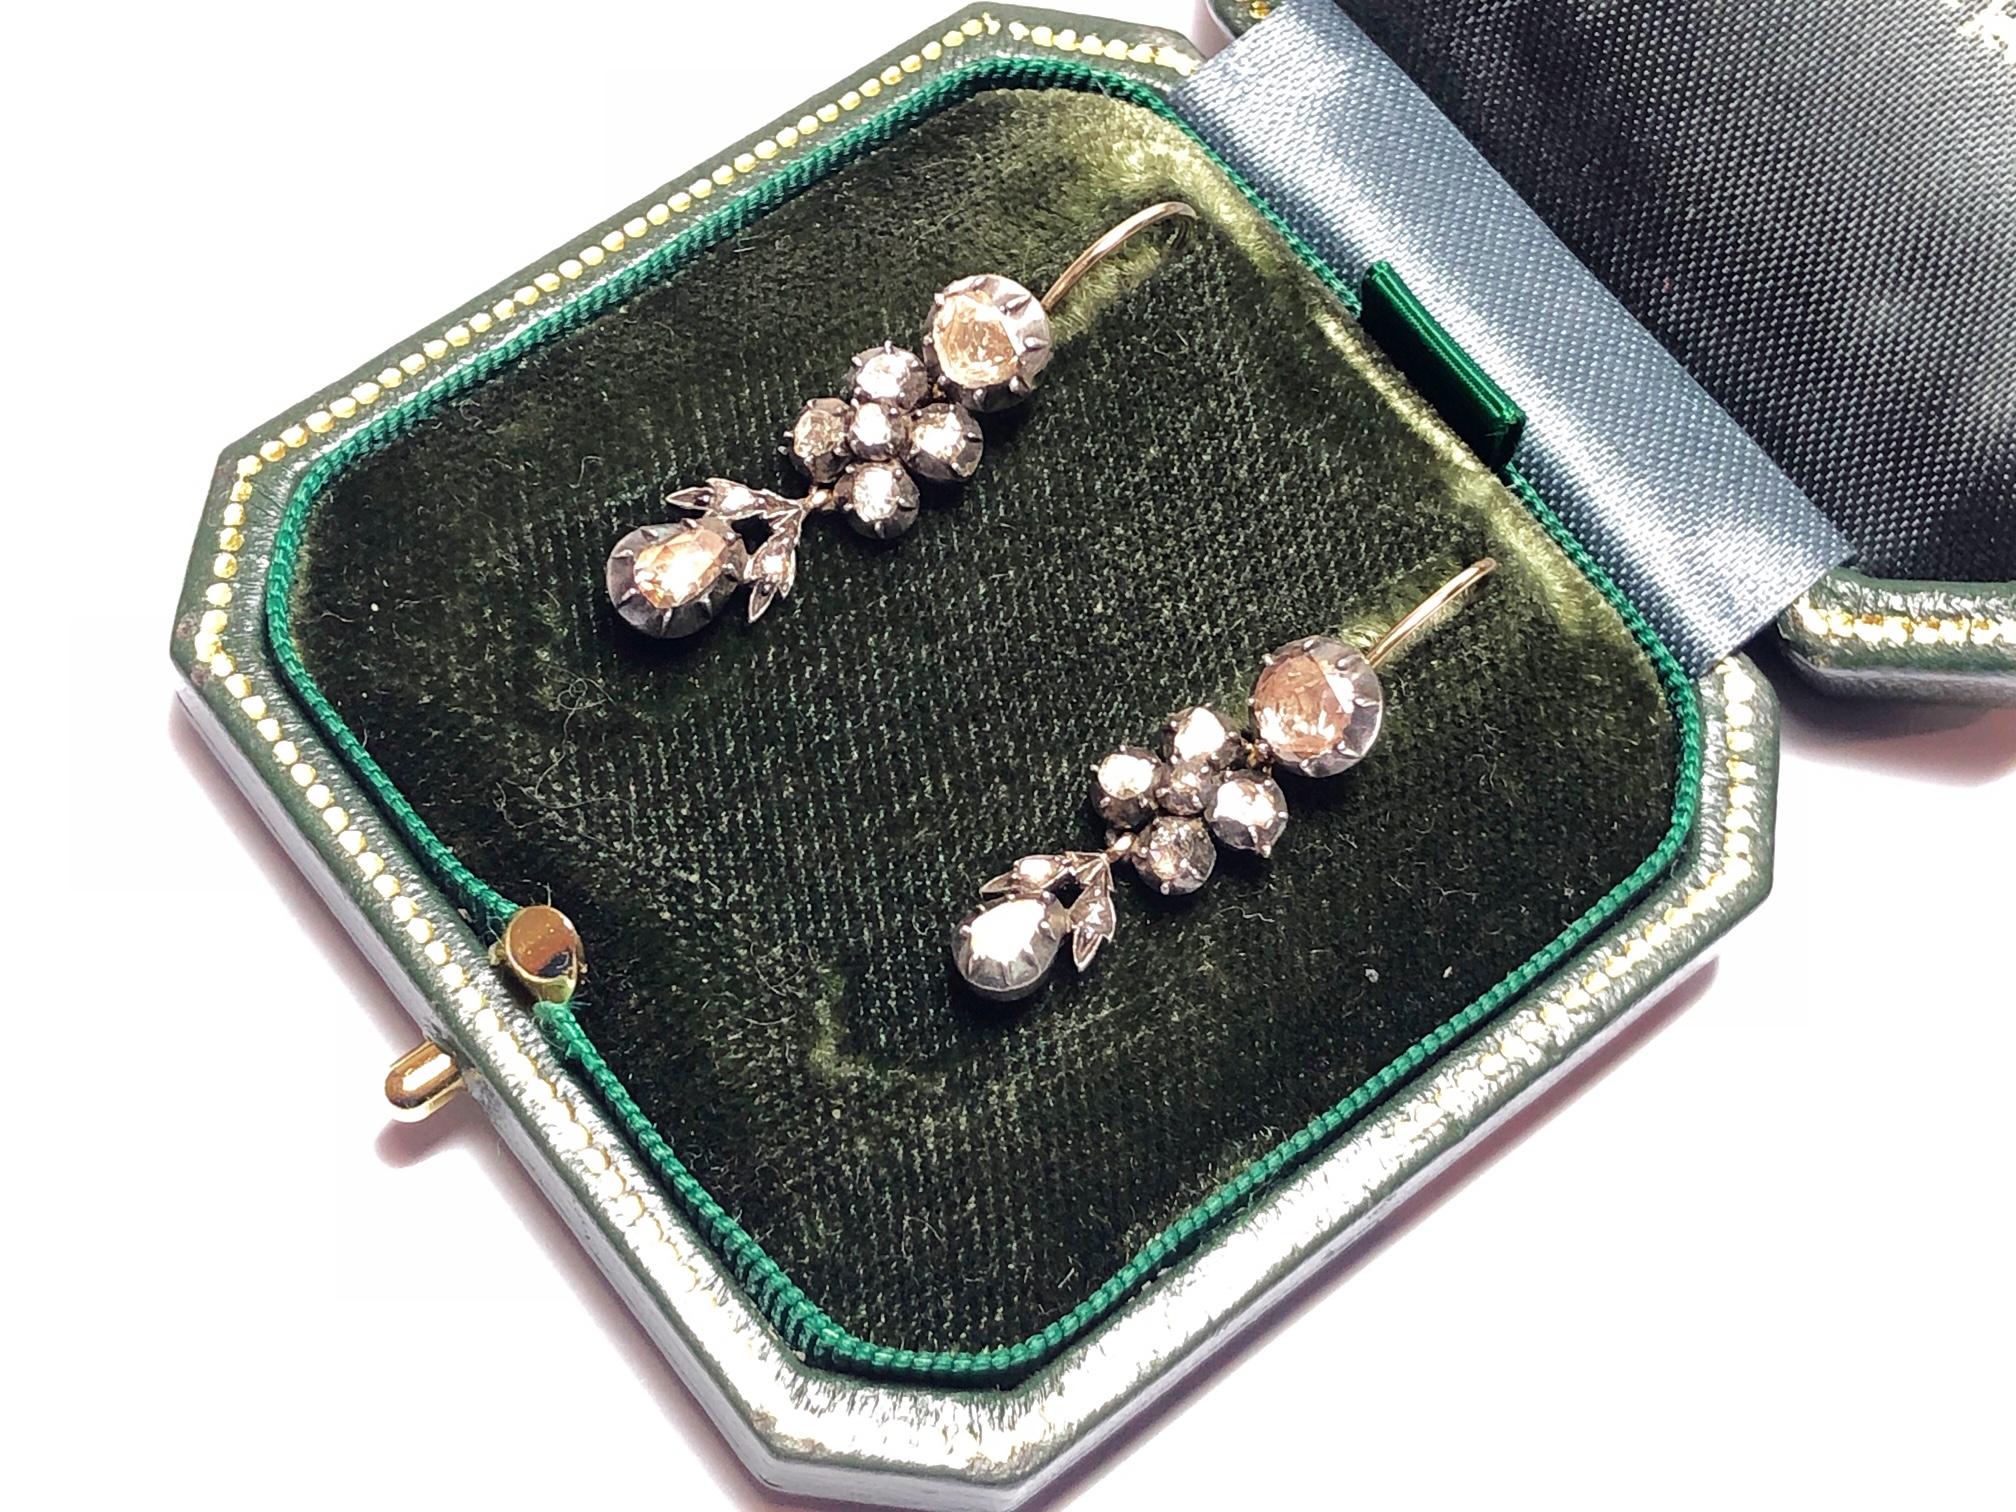 A pair of Georgian, rose-cut diamond drop earrings, with a rose-cut diamond top, with five rose-cut diamonds set in the middle and a drop shaped rose-cut diamond pendant, with rose-cut diamond set leaves, mounted in silver-upon-gold cut down